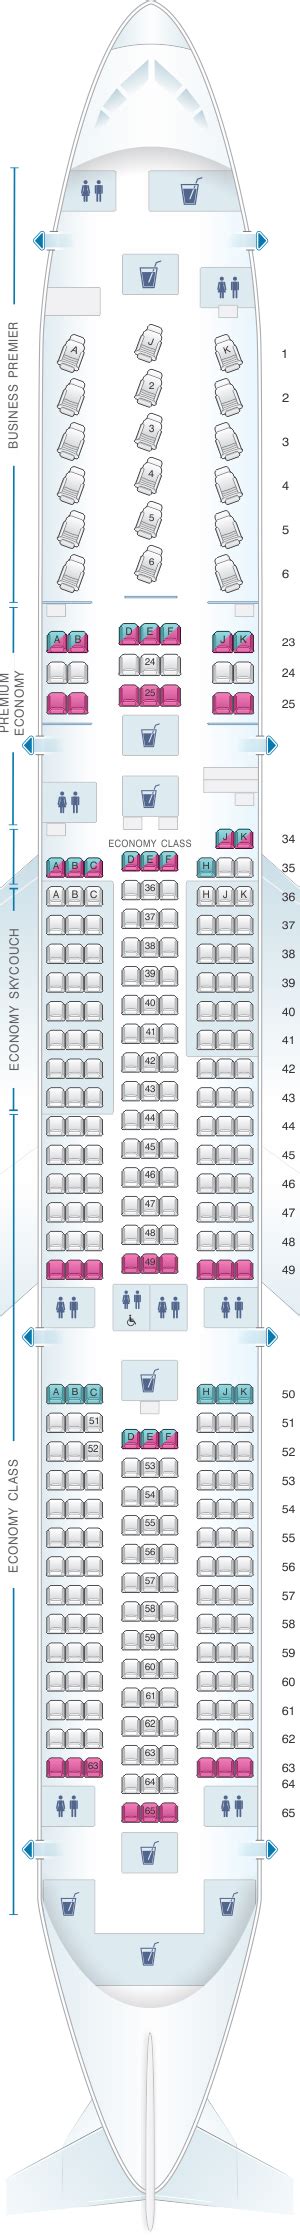 Air New Zealand Boeing Seating Chart